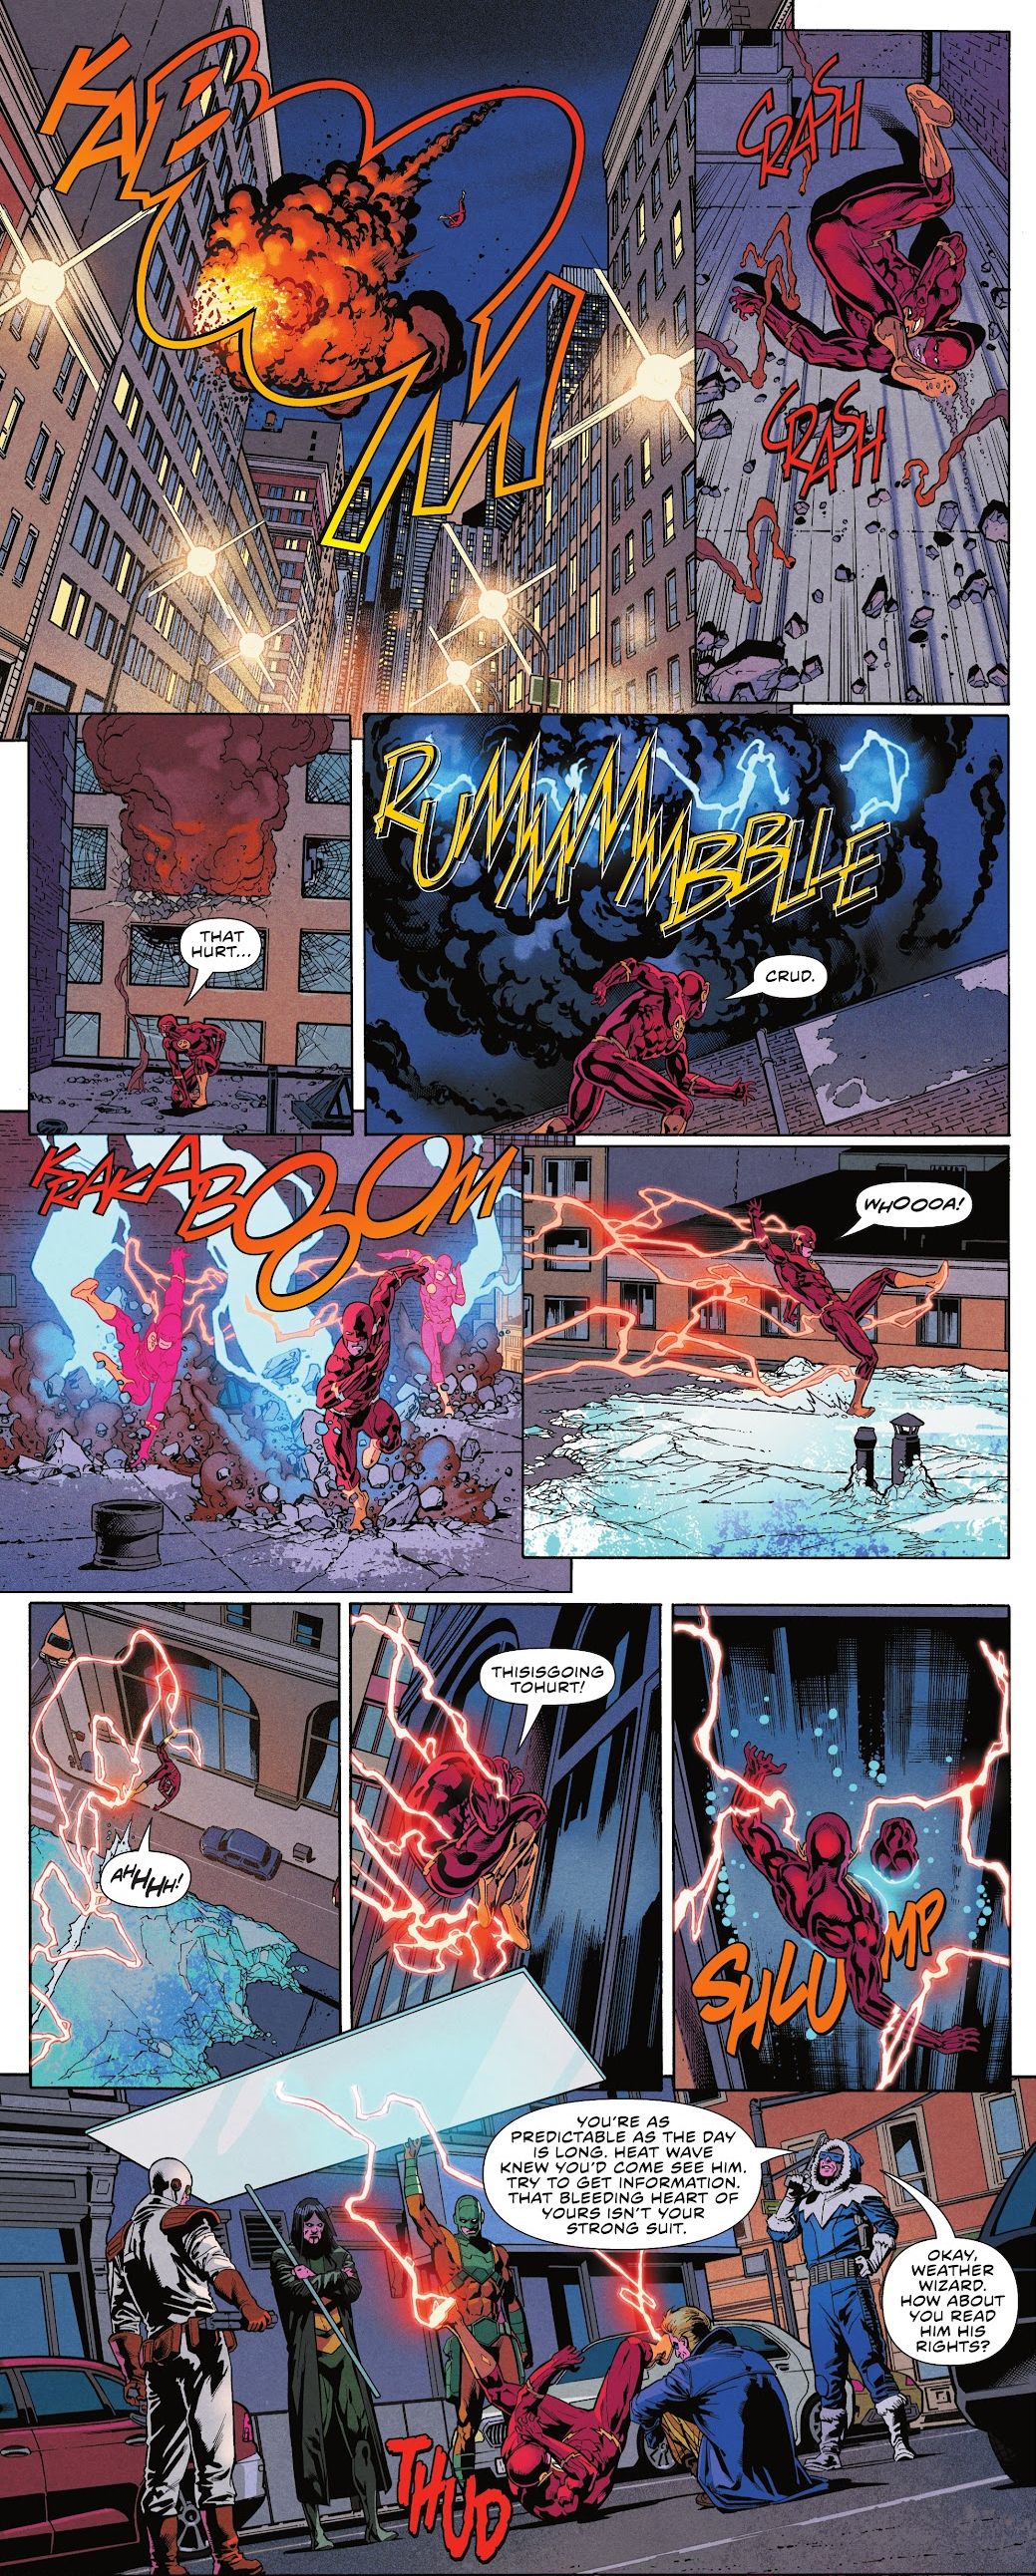 An extended sequence showing Heat Wave Flash shooting out of a window towards Weather Wizard;  Weather Wizard uses lightning to drive him into a patch of Captain Cold's ice;  and the Flash slips into the Mirror Master's waiting portal trap on the ice.